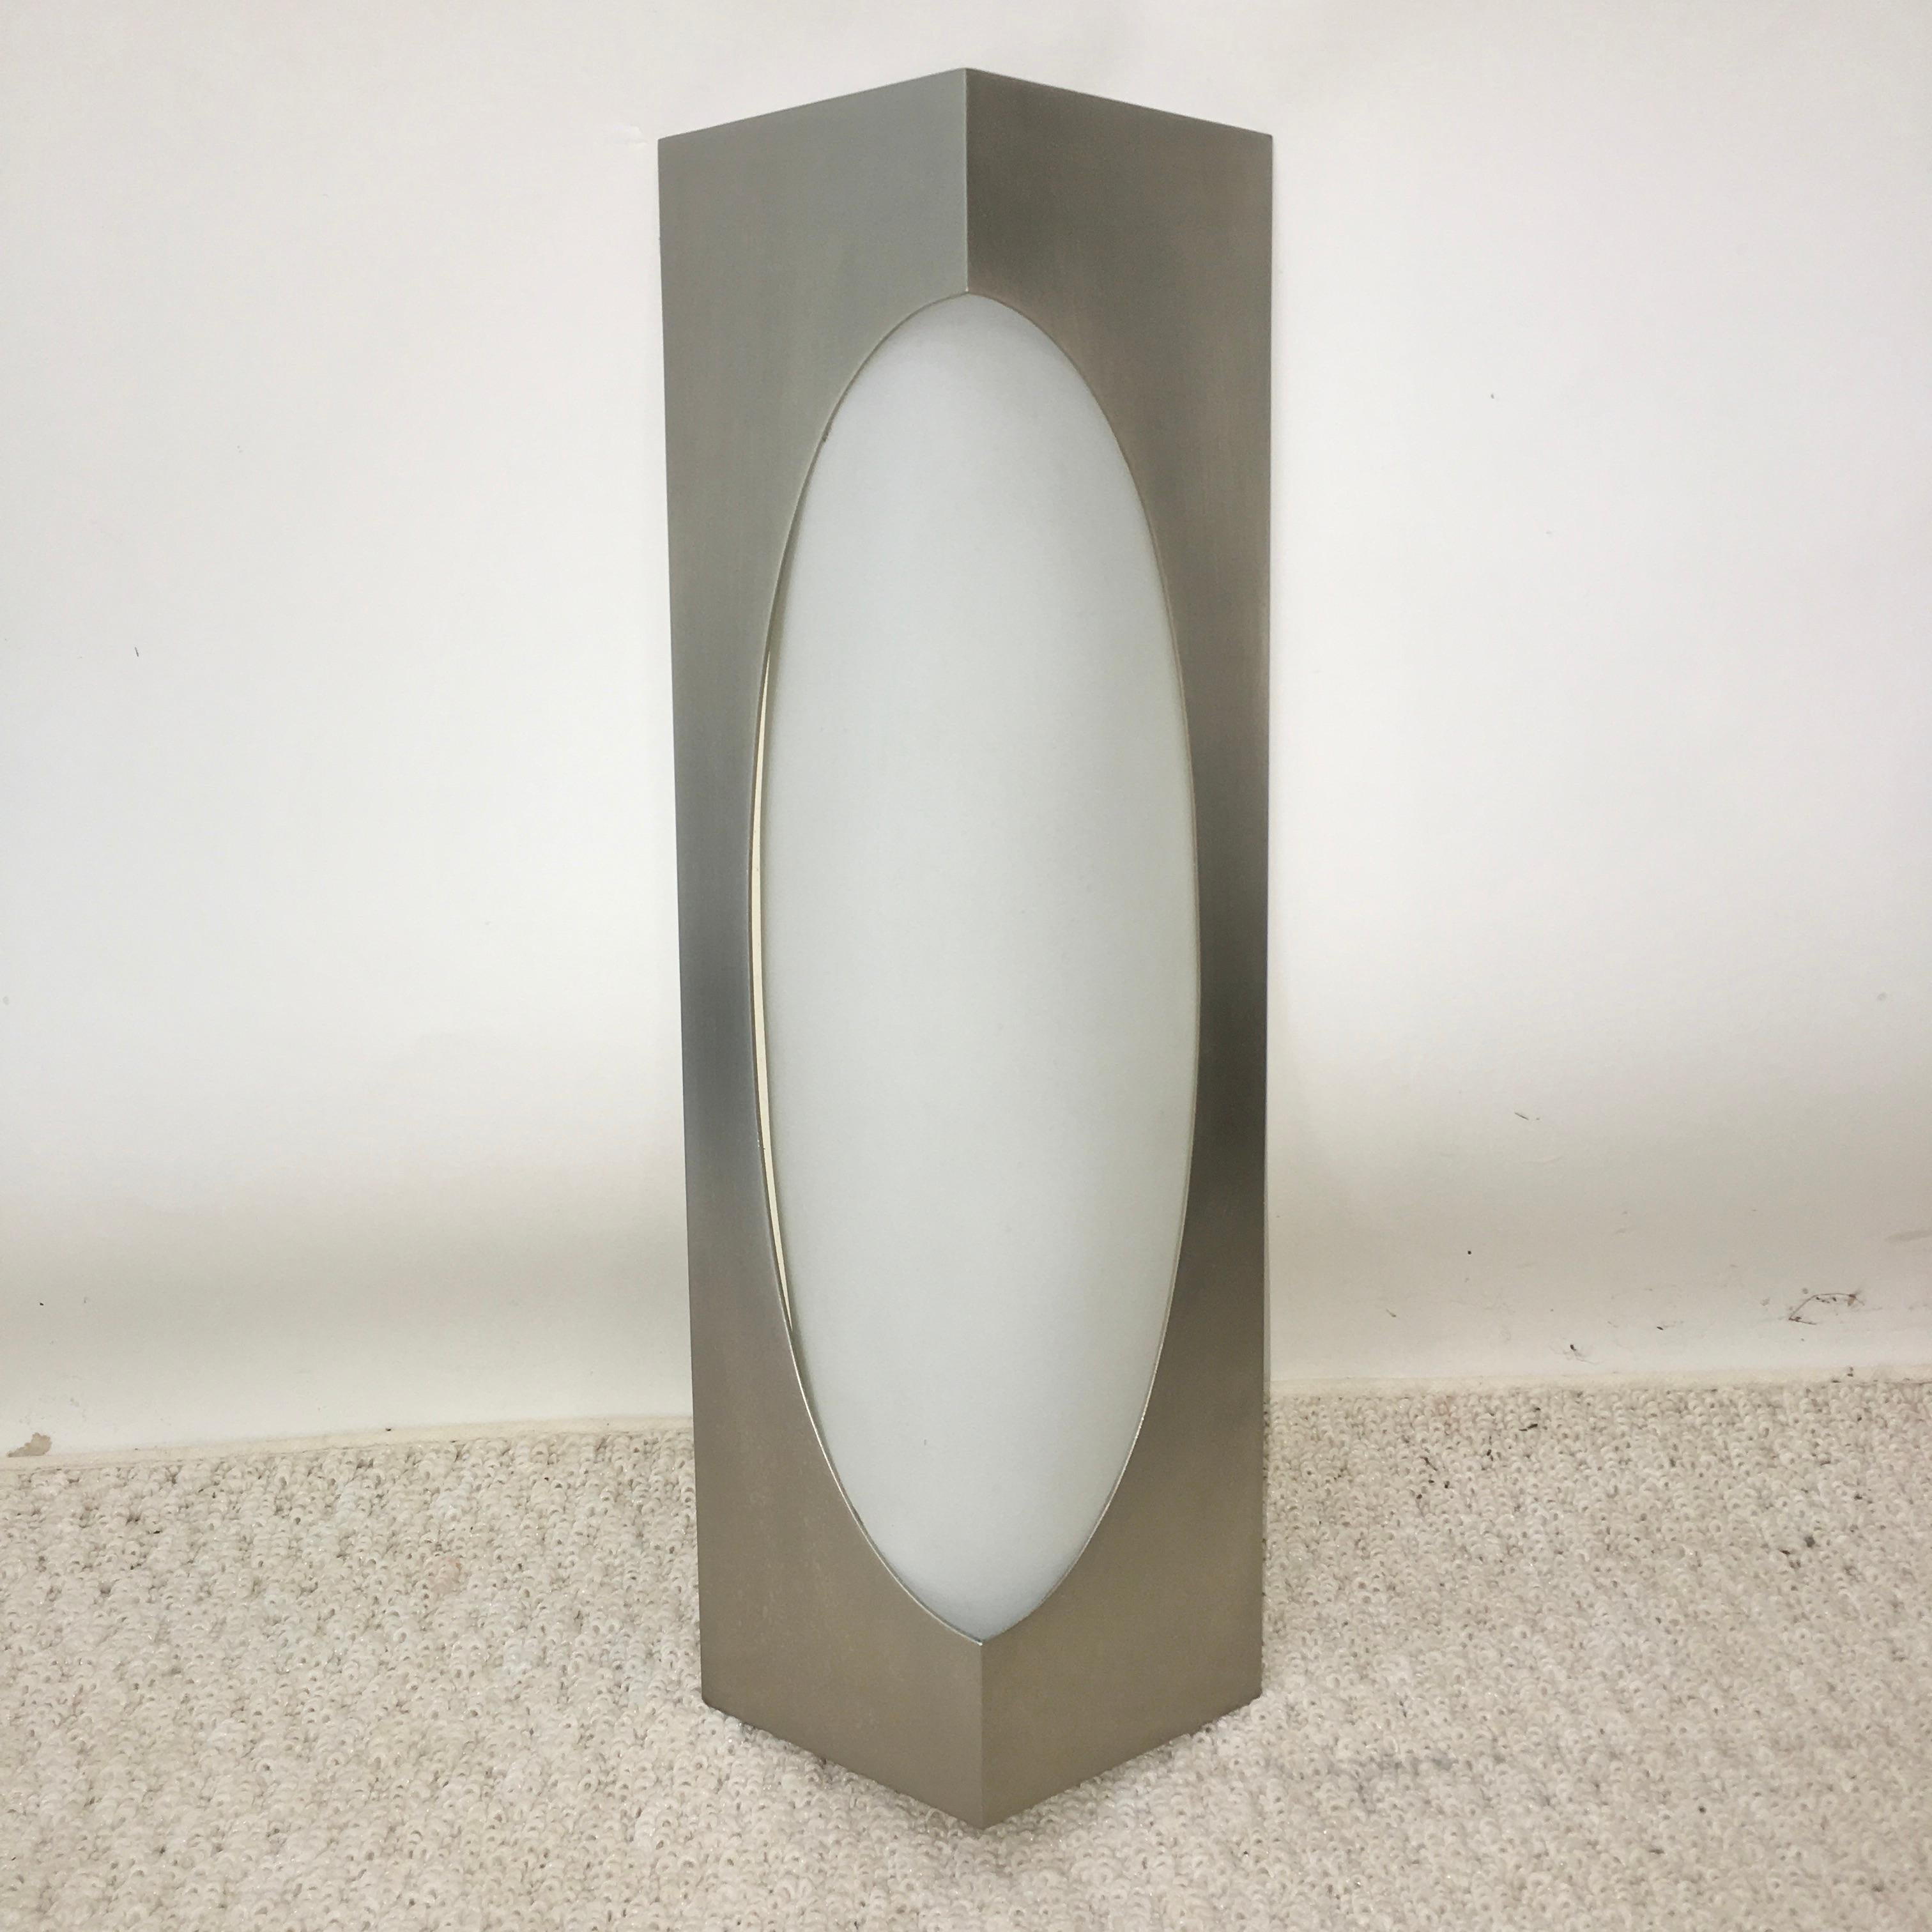 Triangular wedge form wall-mounted lamp by Fontana Arte, circa 1965. Brushed stainless steel frame and opaline glass reflector. Original hefty stainless steel knurled fasteners. See original ad from 1965 Domus magazine. Ideal for a vanity or powder